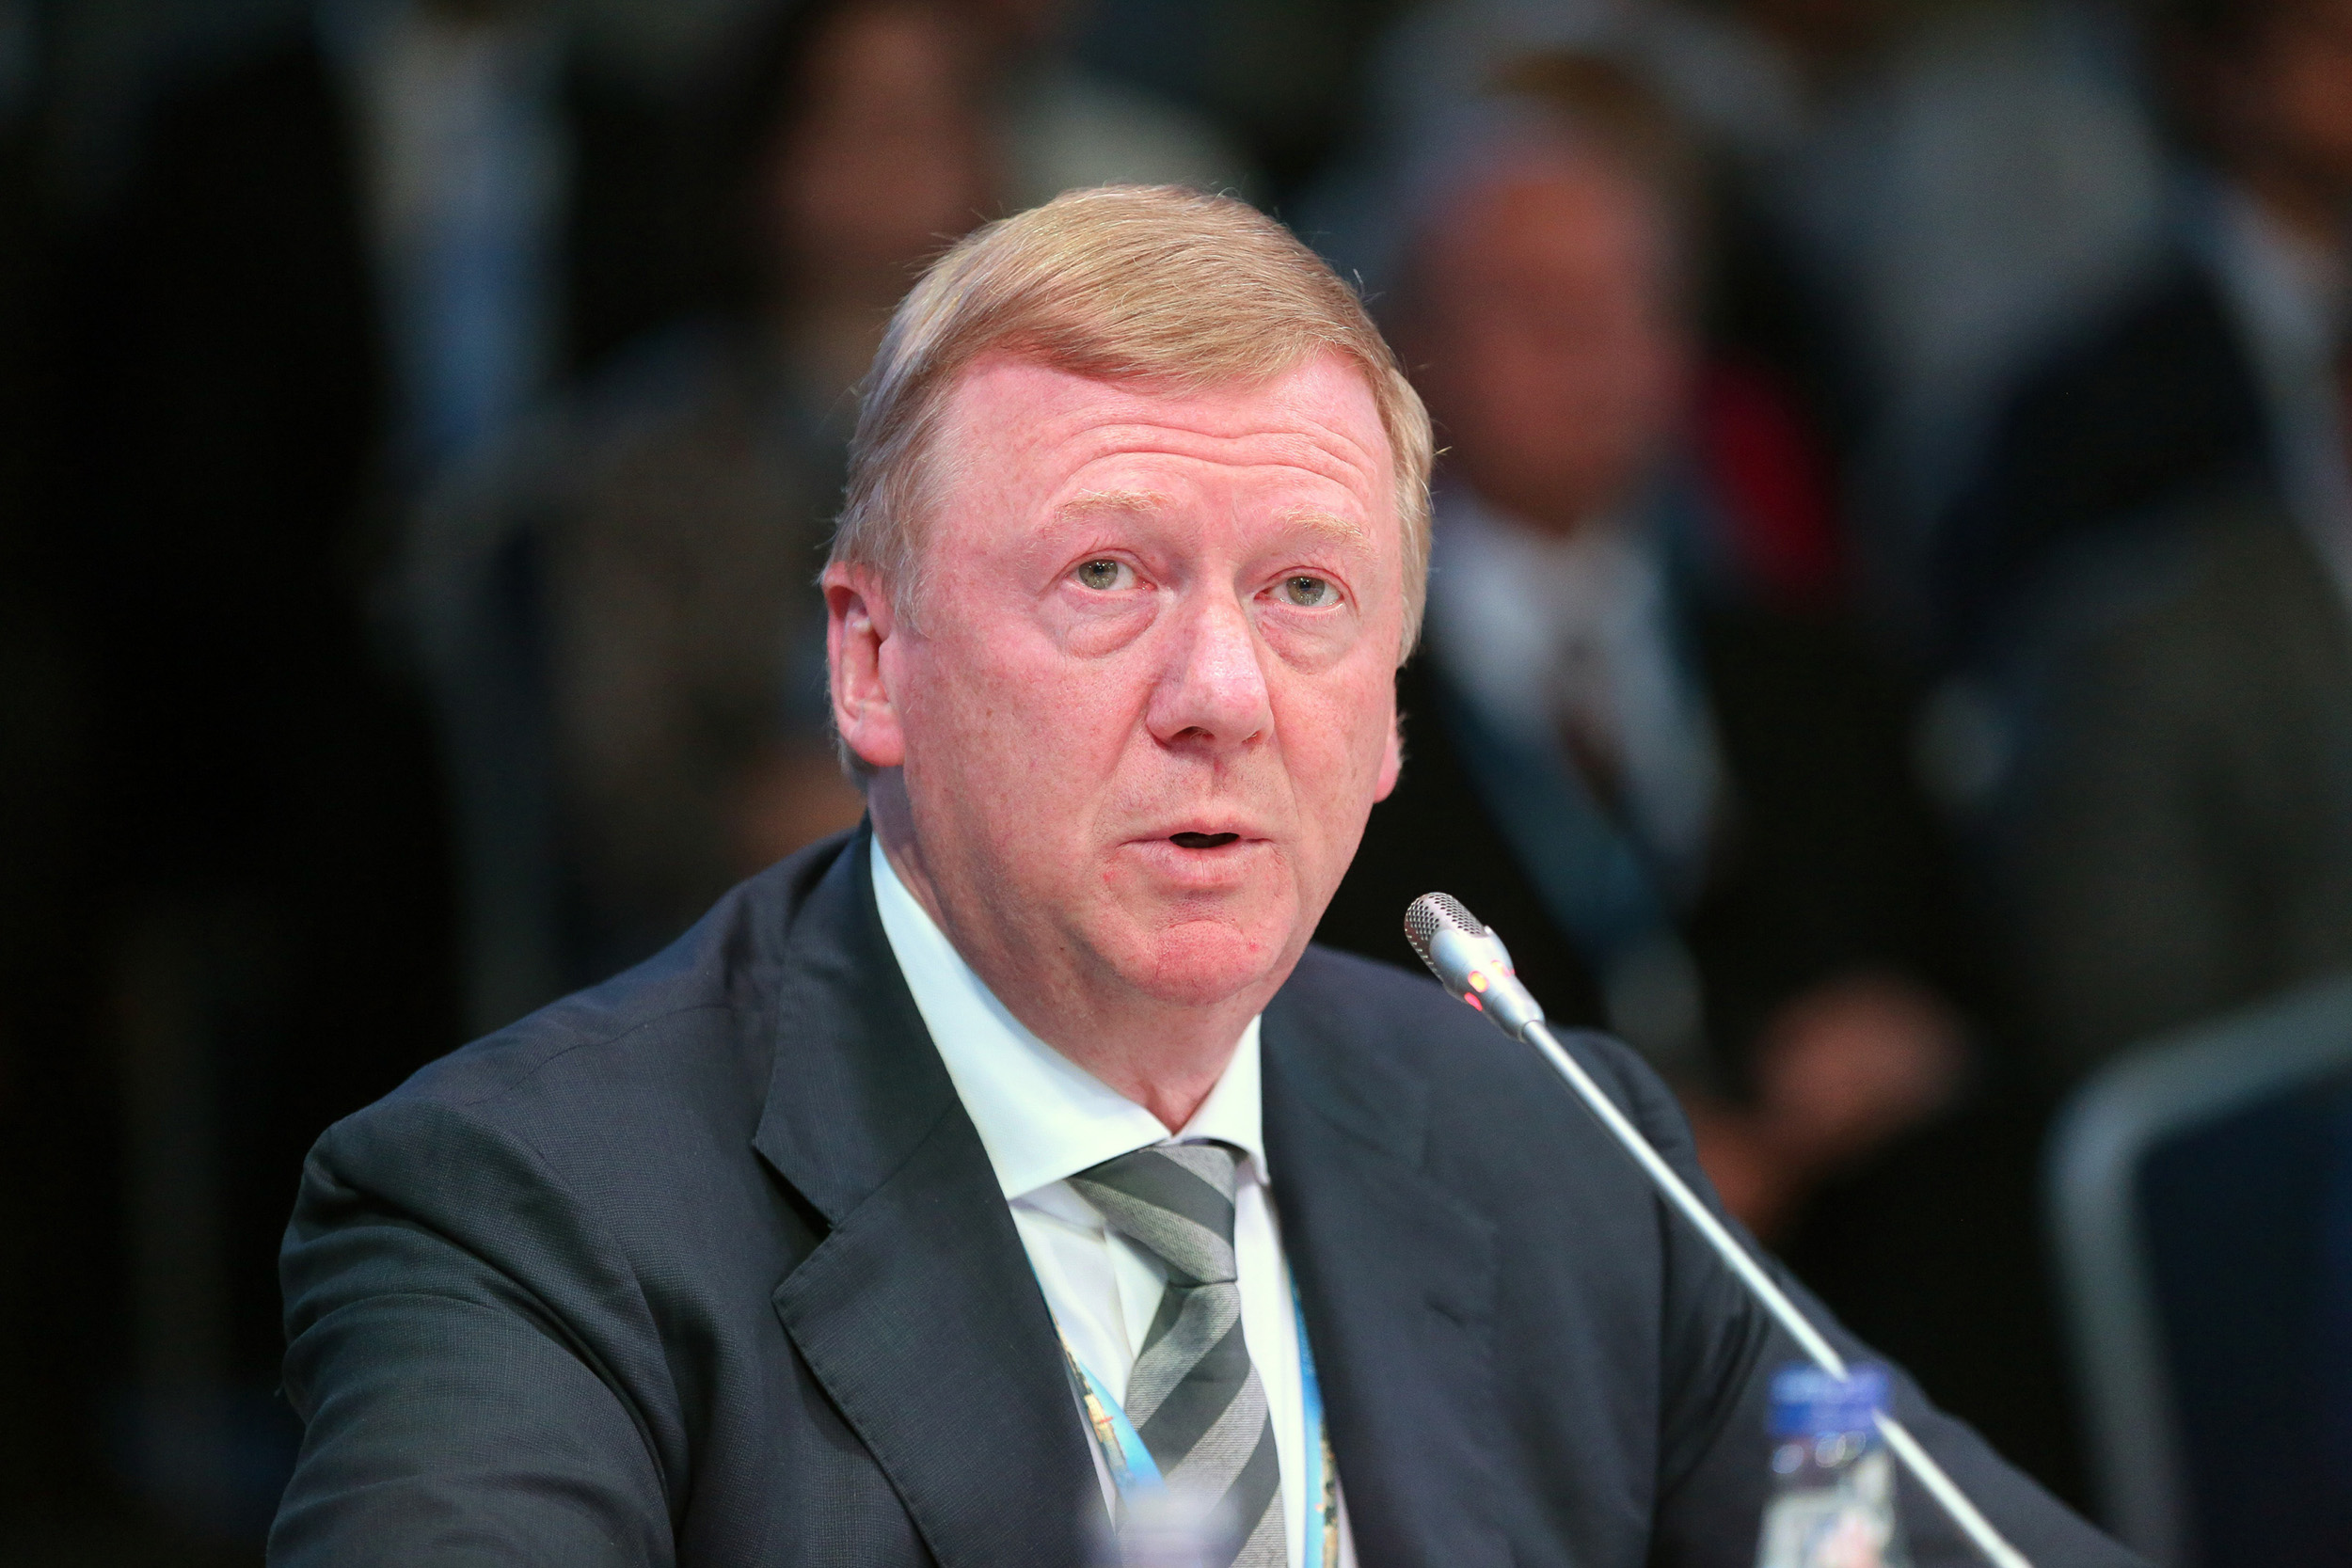 Anatoly Chubais, chief executive officer of OAO Rusnano, speaks during a session at the St. Petersburg International Economic Forum (SPIEF) in Saint Petersburg, Russia, on June 18, 2015.